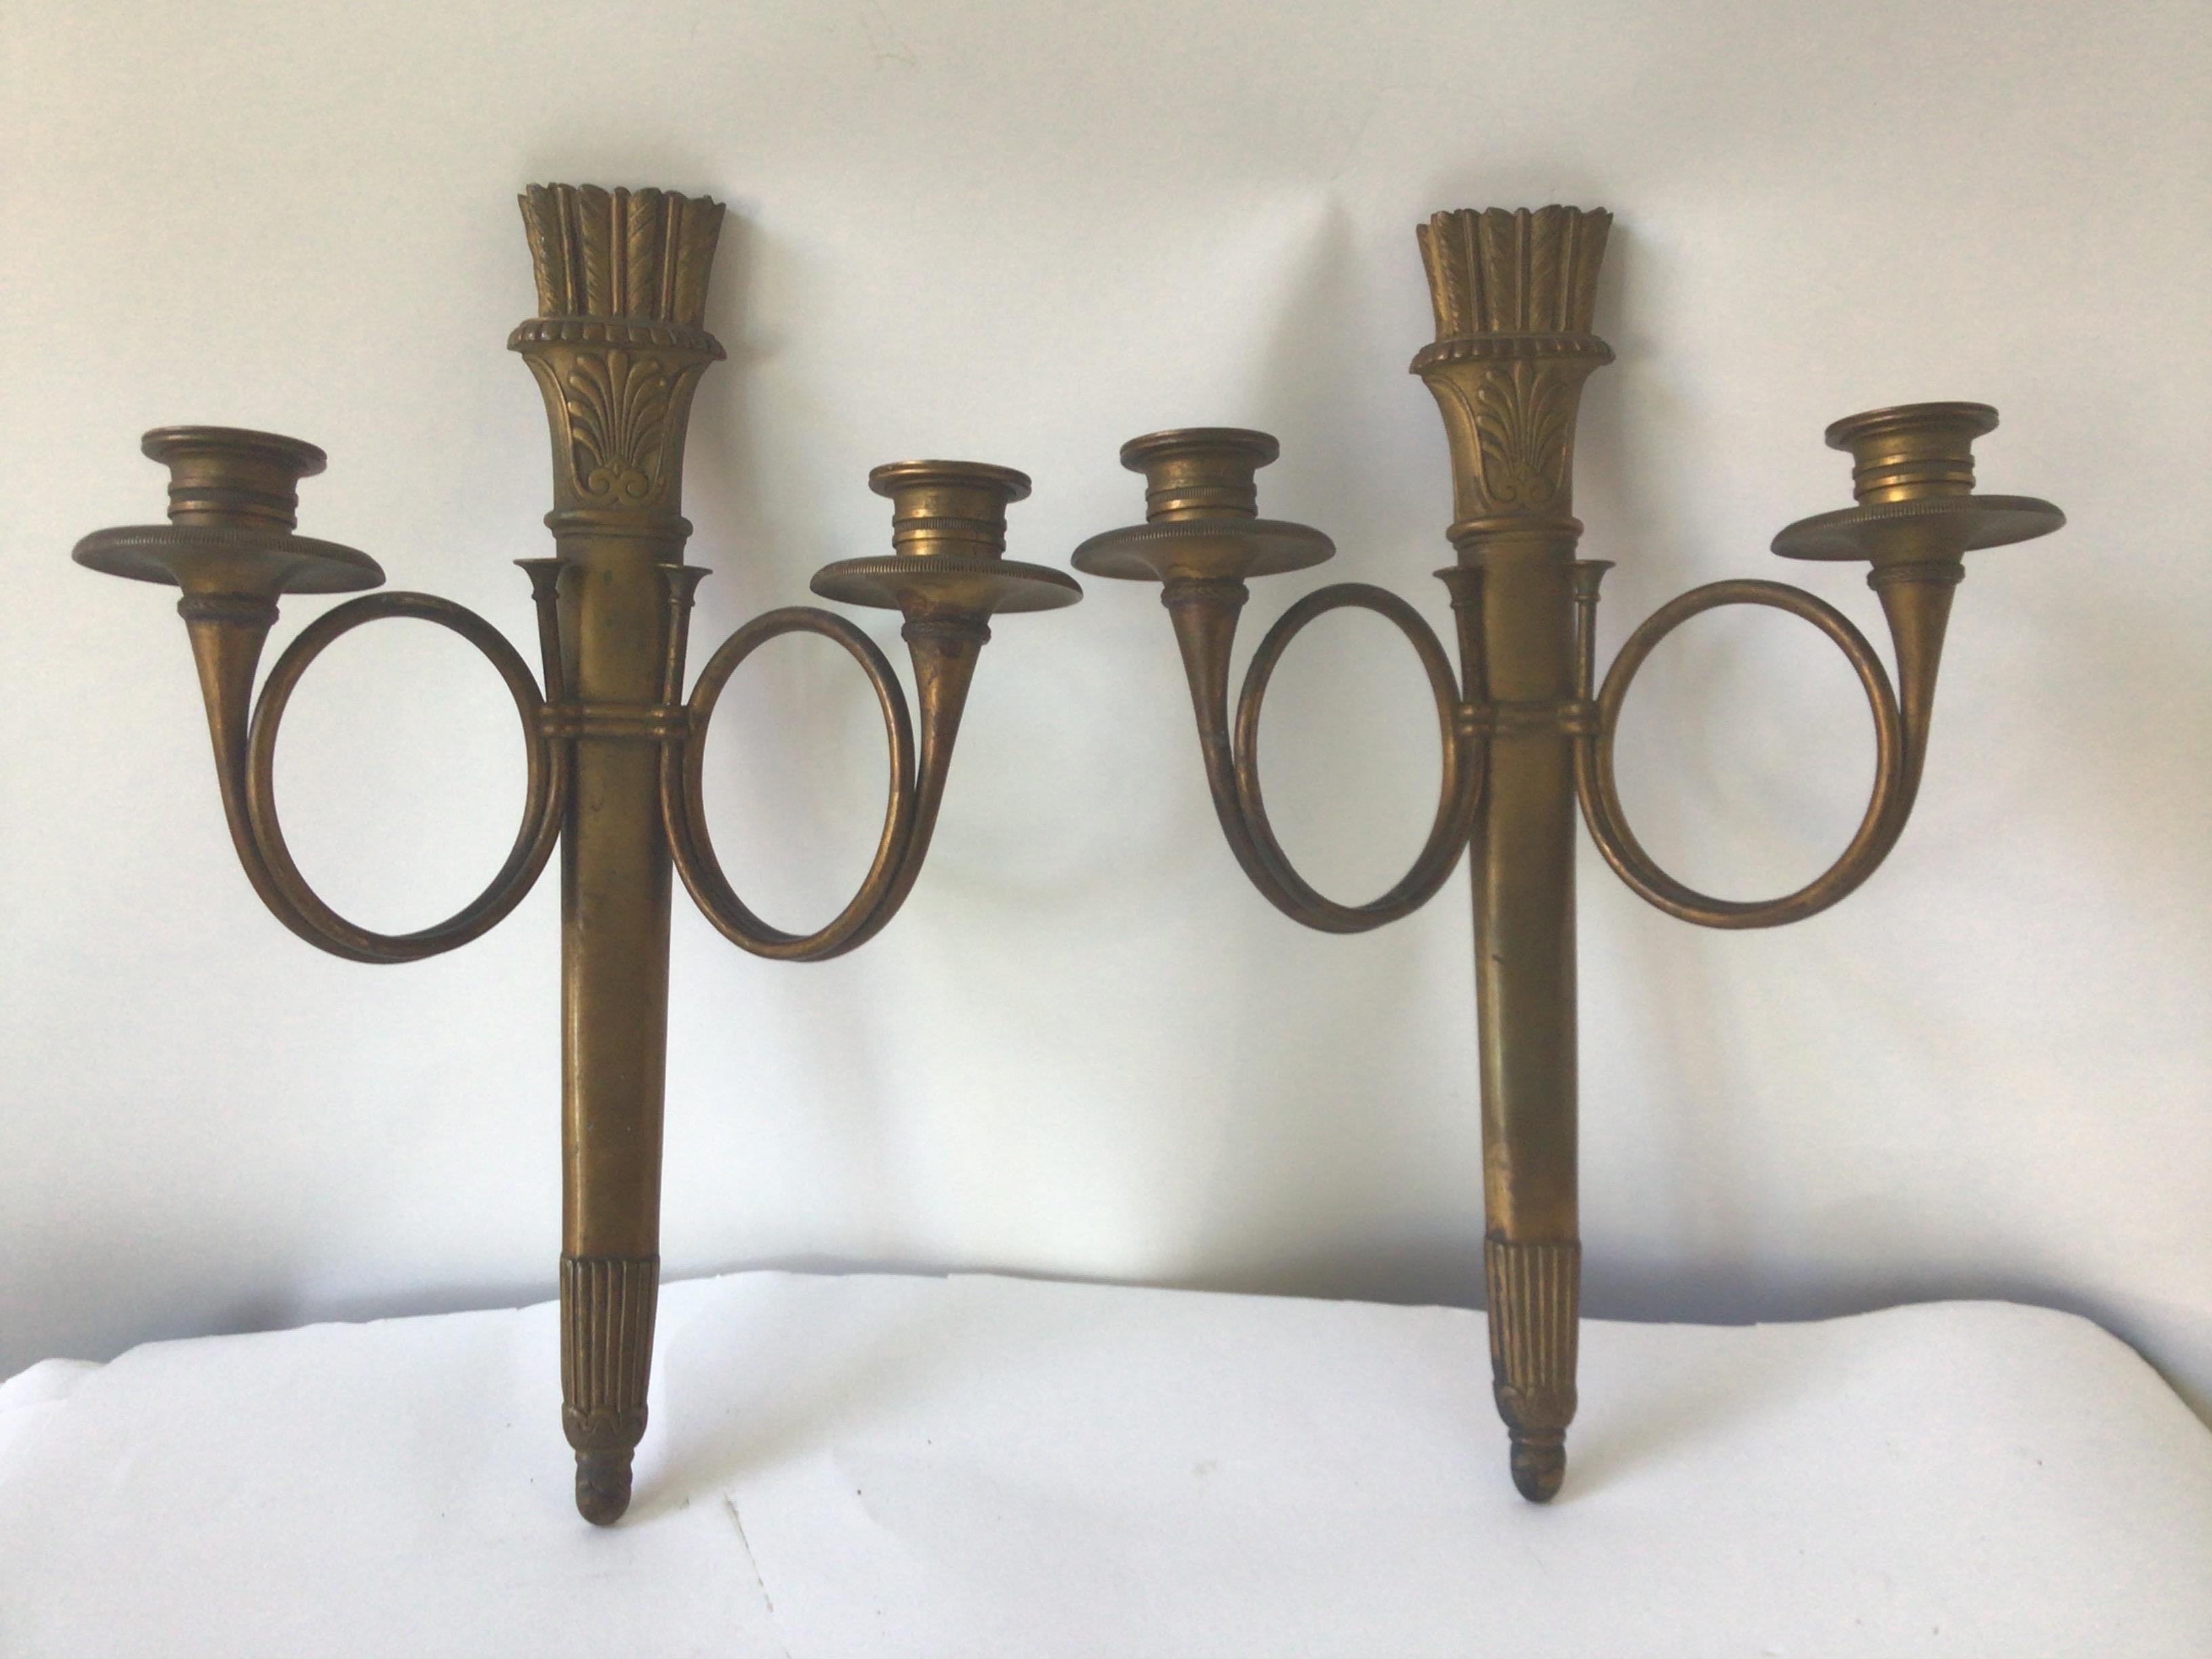 1890s French empire bronze sconces. There is no hole in the arm, so either you have to run the wire on the outside of the arm (a French wire), or use candles.